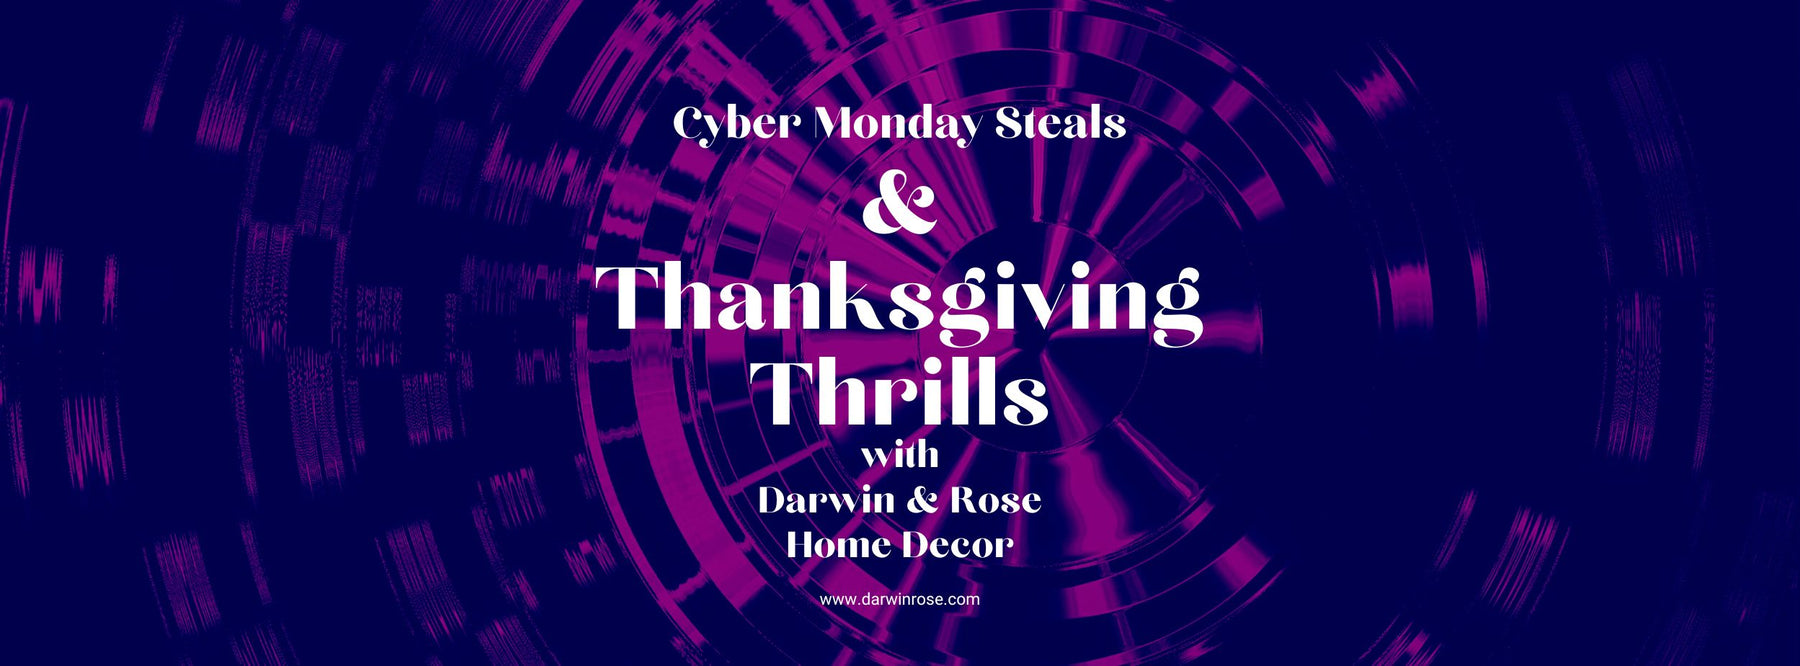 Cyber Monday Steals & Thanksgiving Thrills at Darwin & Rose Home Decor!